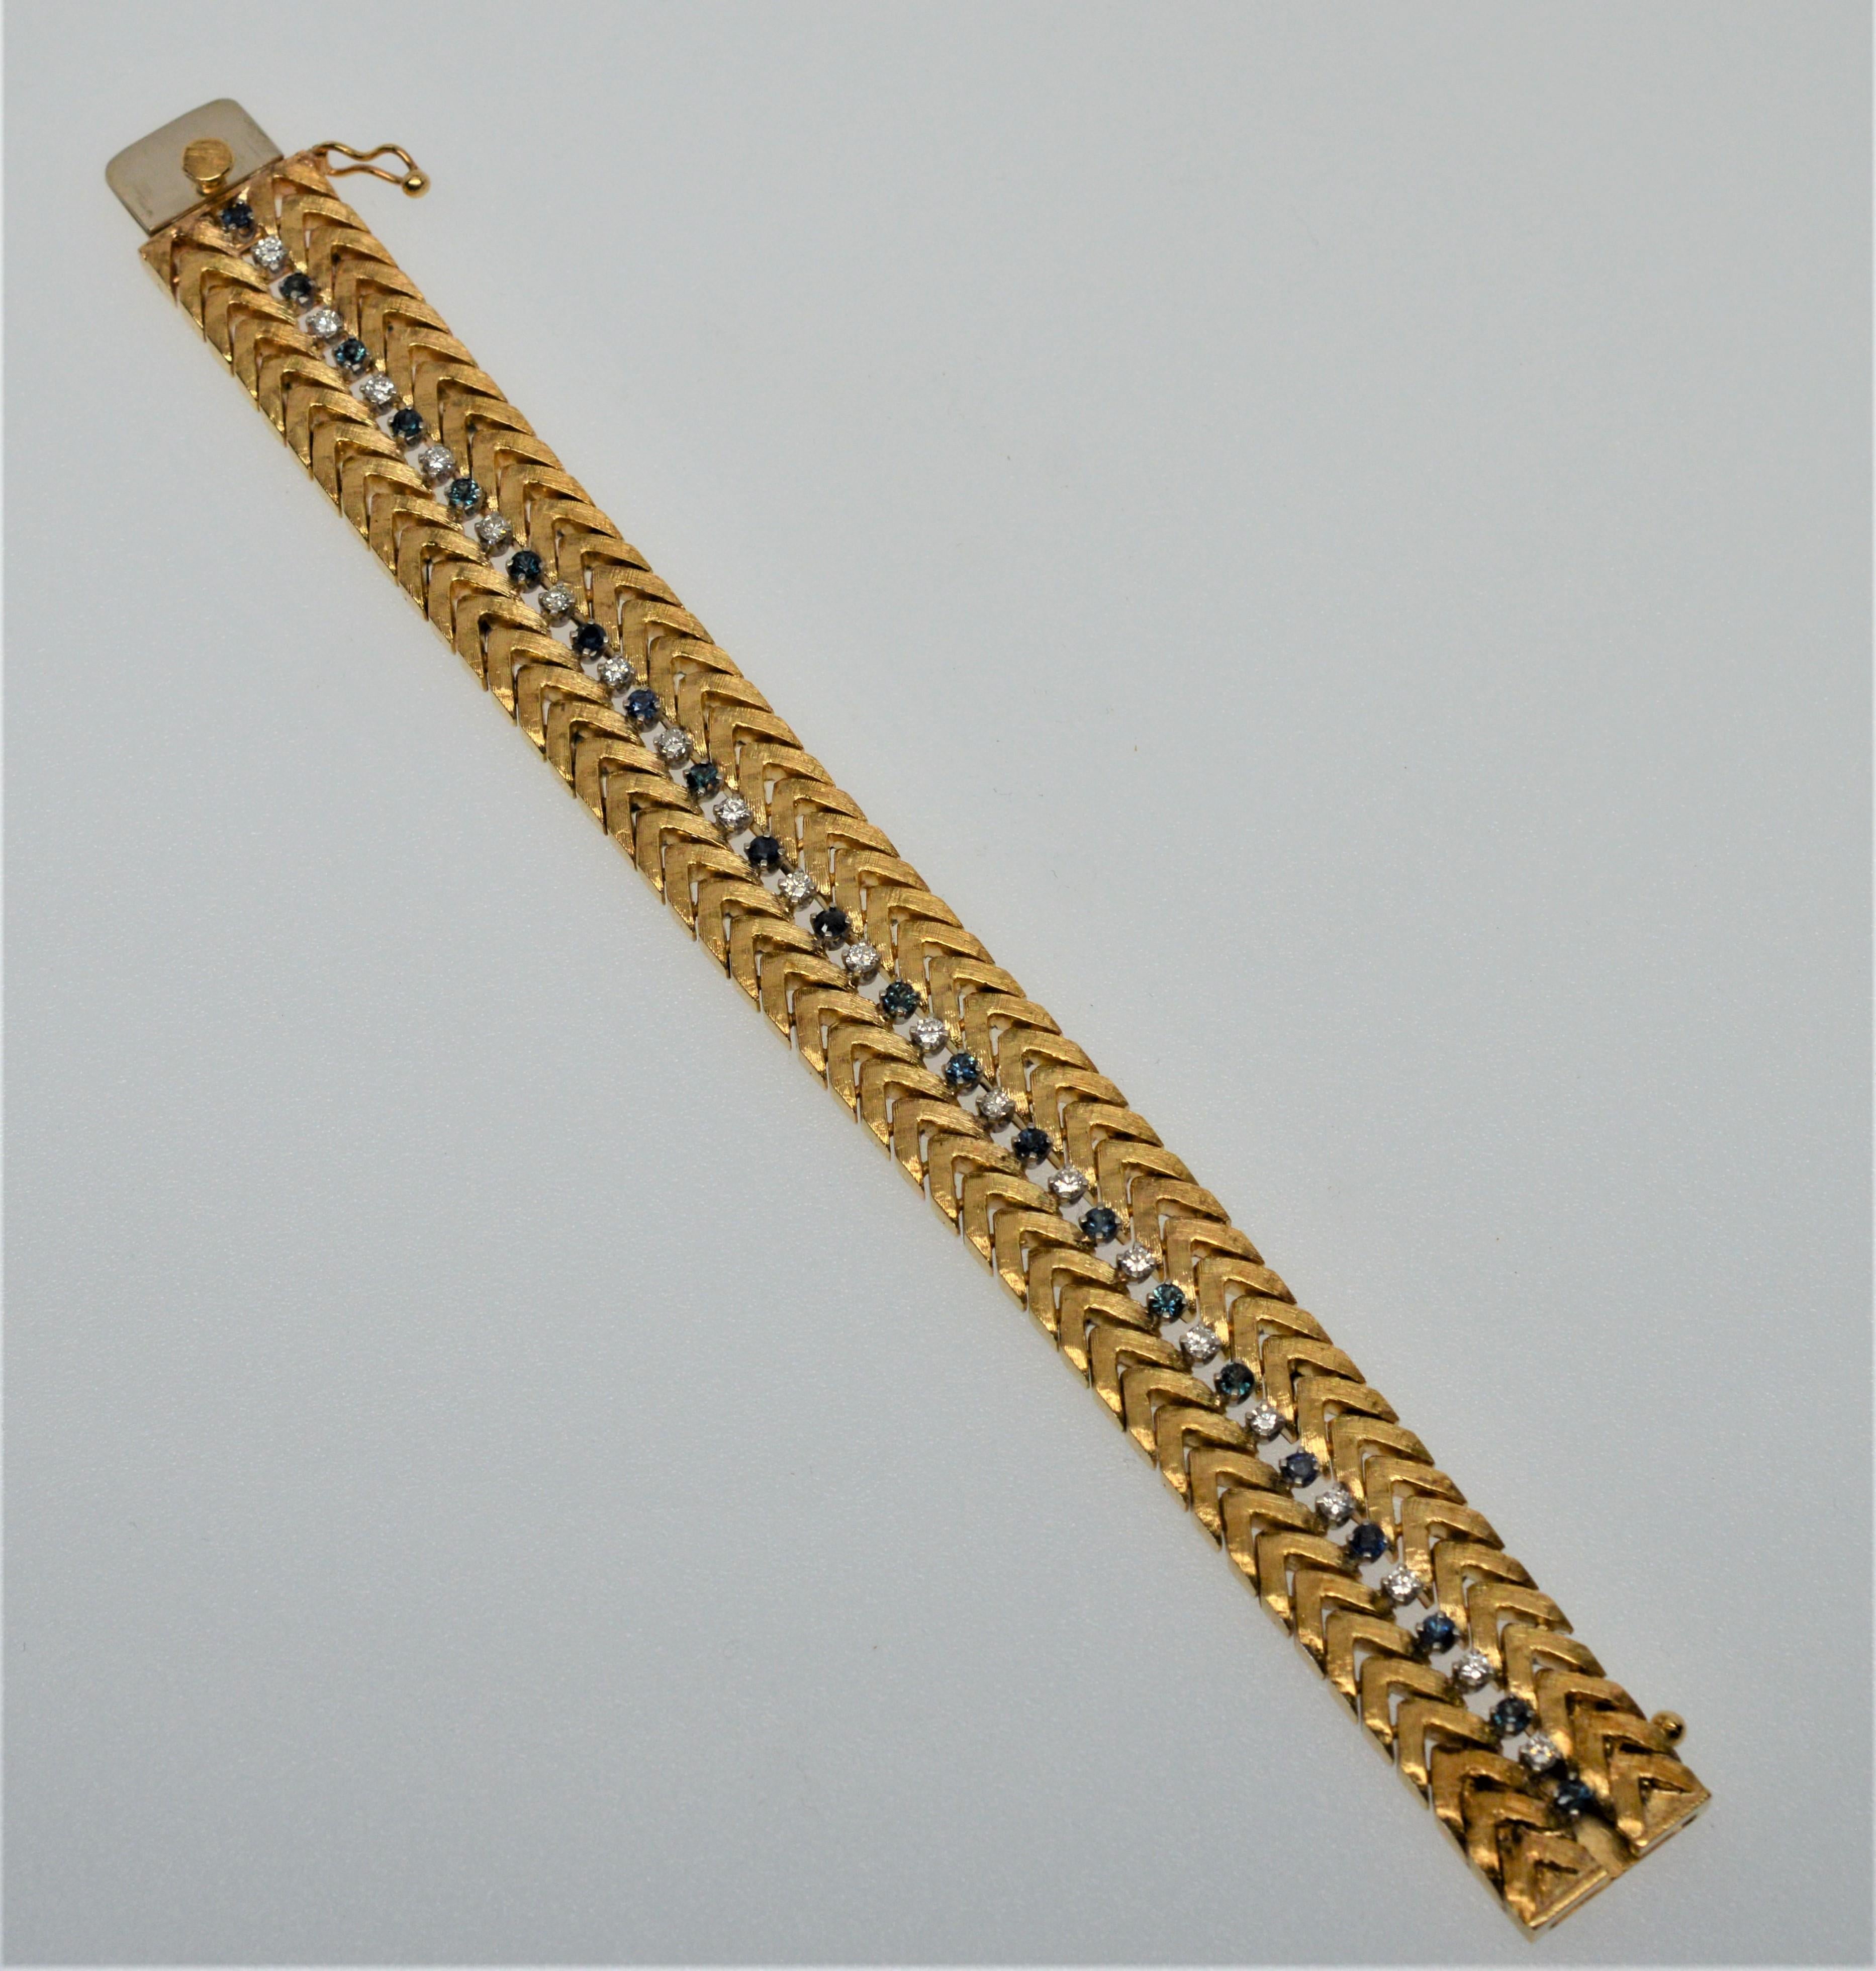 Beautifully constructed in a classic herringbone style with links of elegant satin fourteen karat yellow gold (14K). The bracelet is adorned with a gemstone center line of alternating individually prong set white diamonds, .315 total carat weight